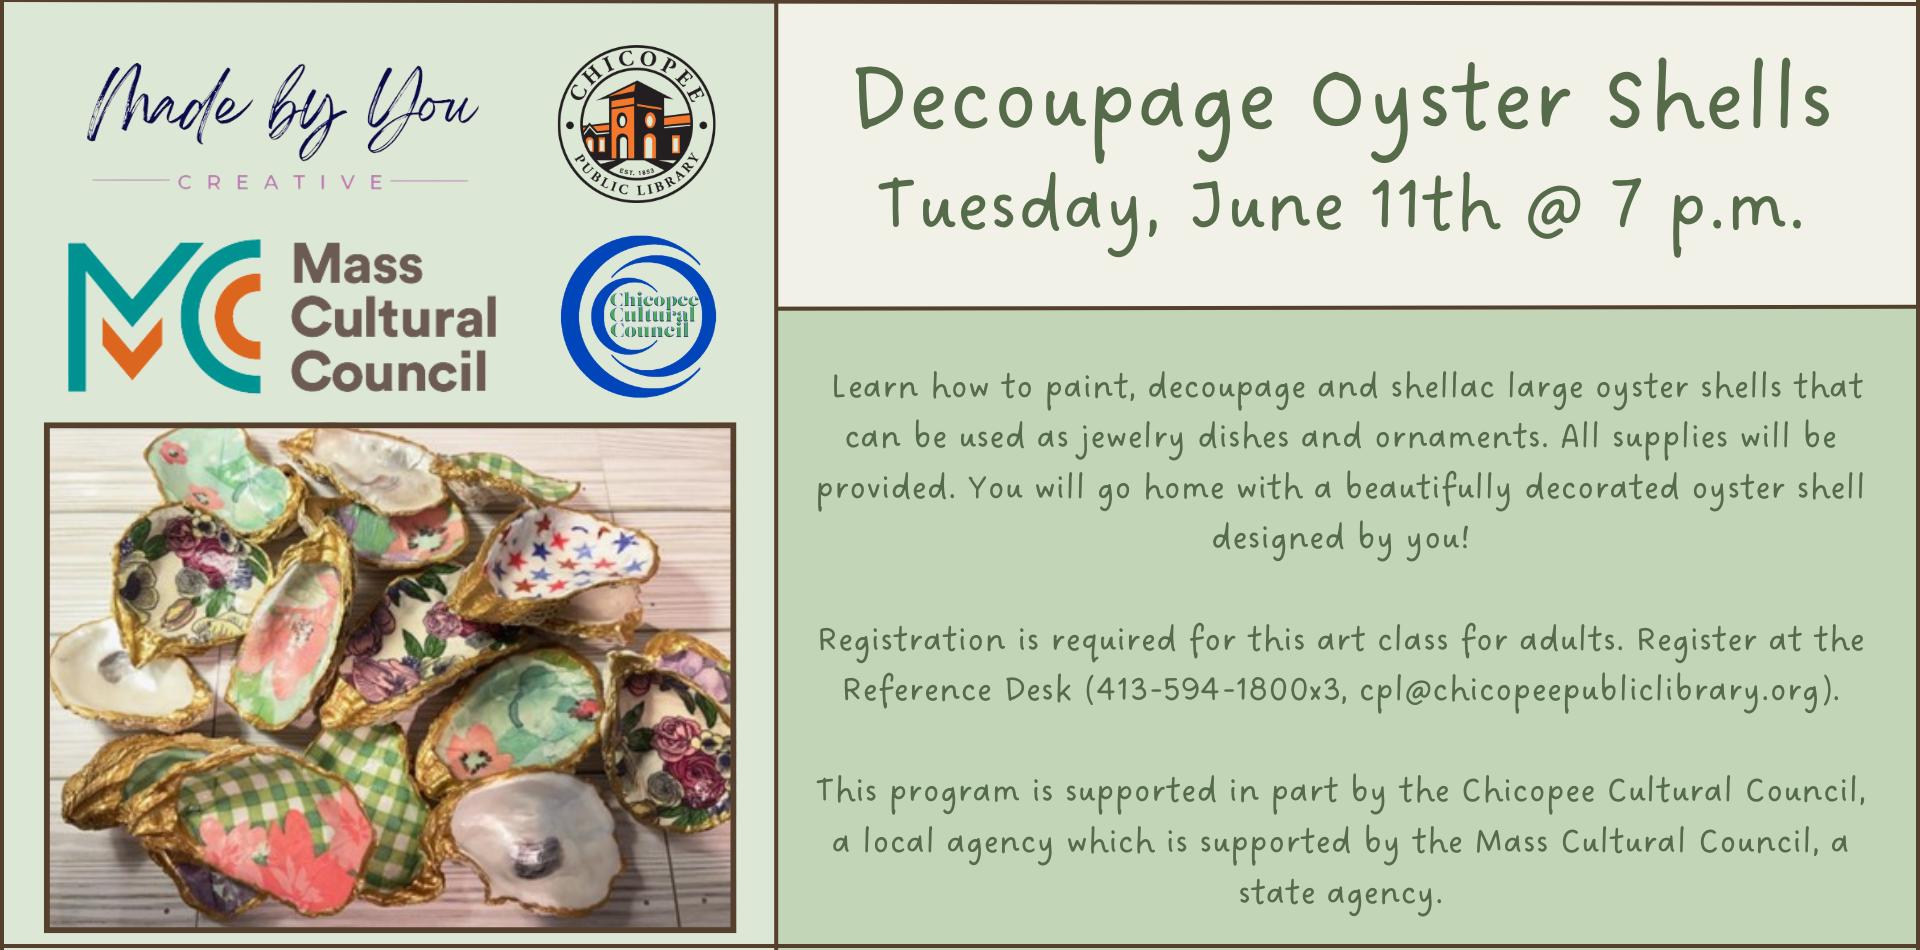 Join us for a decoupage shell class on June 11 at 7:00pm. Registration is required.